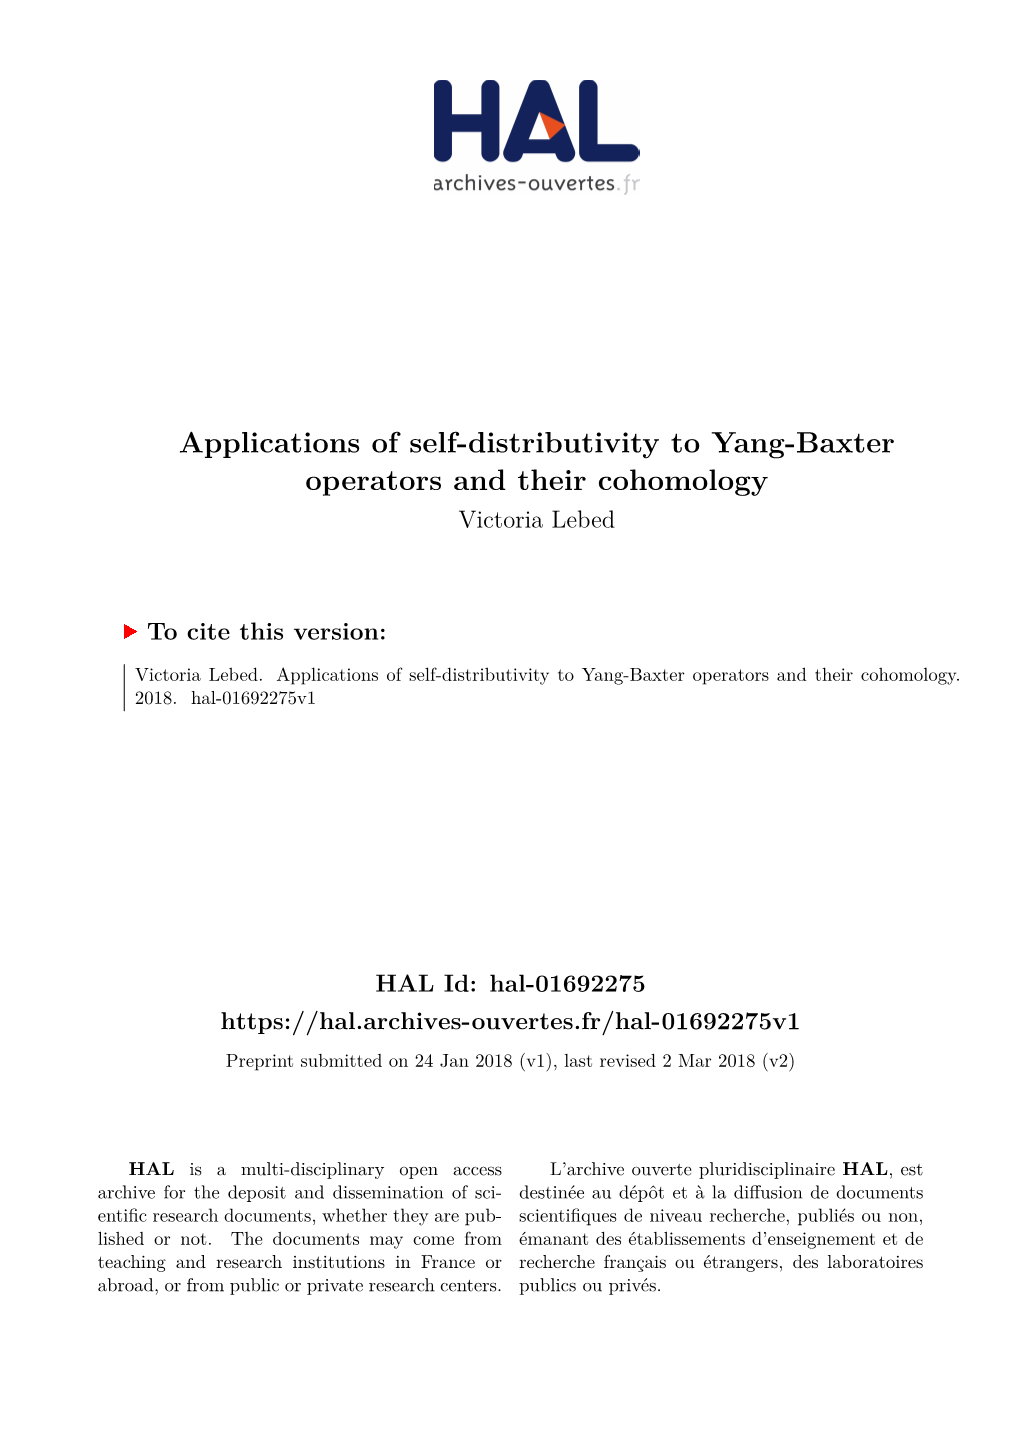 Applications of Self-Distributivity to Yang-Baxter Operators and Their Cohomology Victoria Lebed